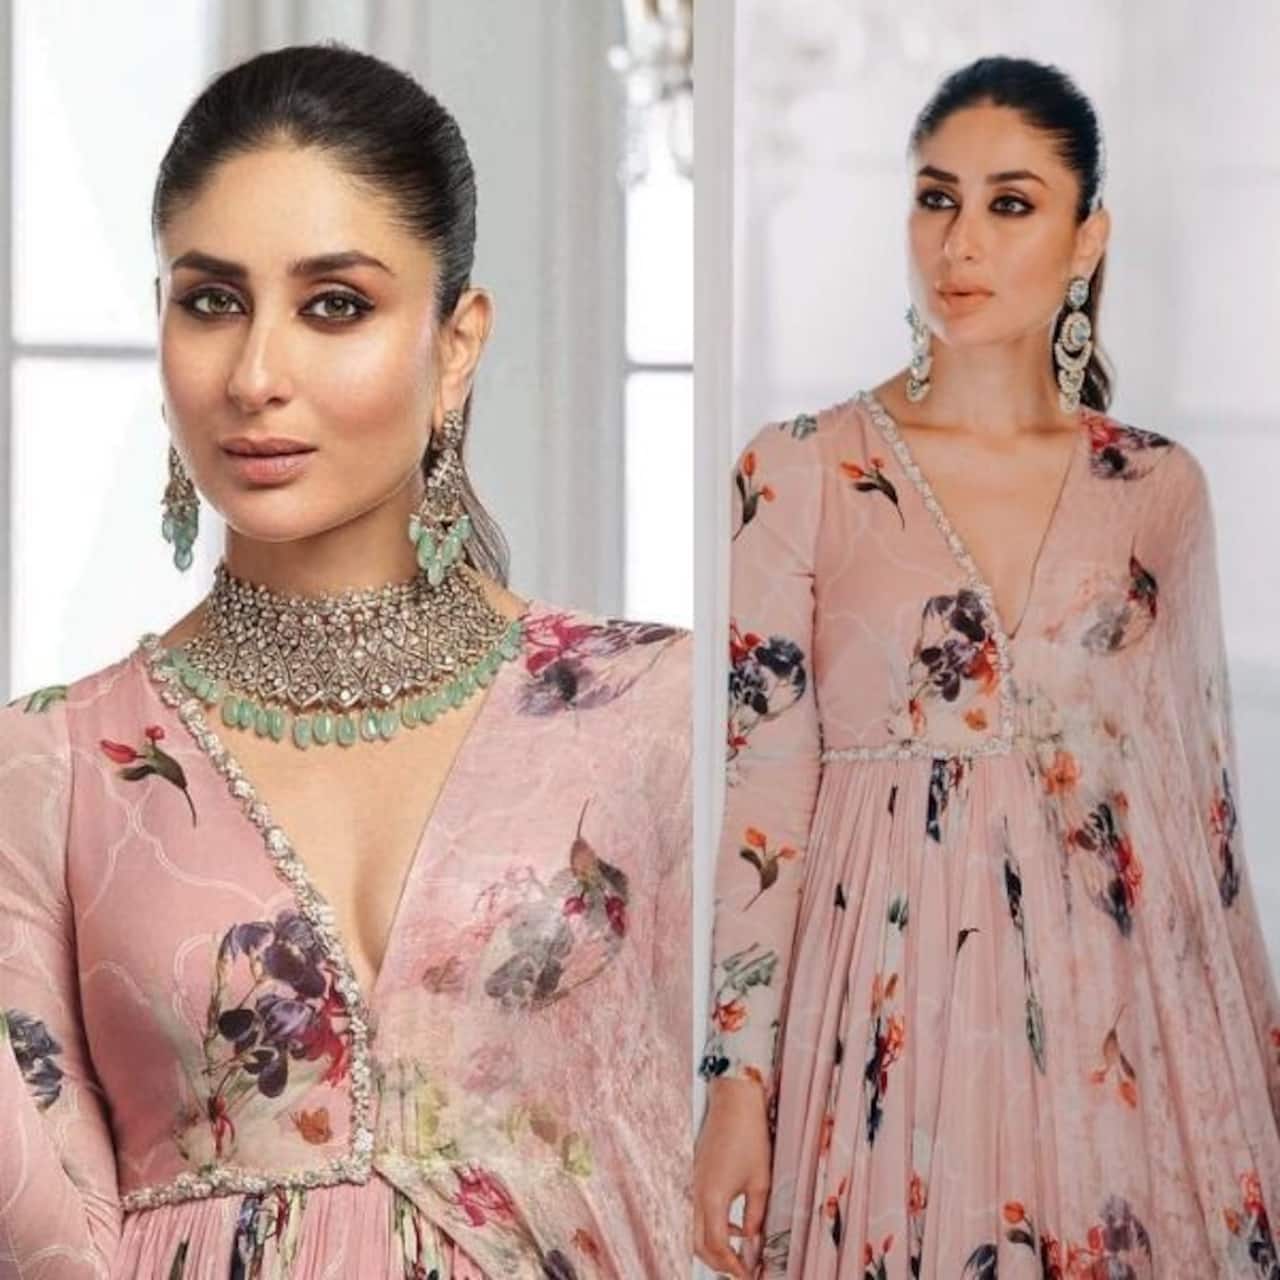 Have You Seen These Latest Pictures Of Kareena Kapoor Khan Looking Radiant In Ethnic Ensembles 